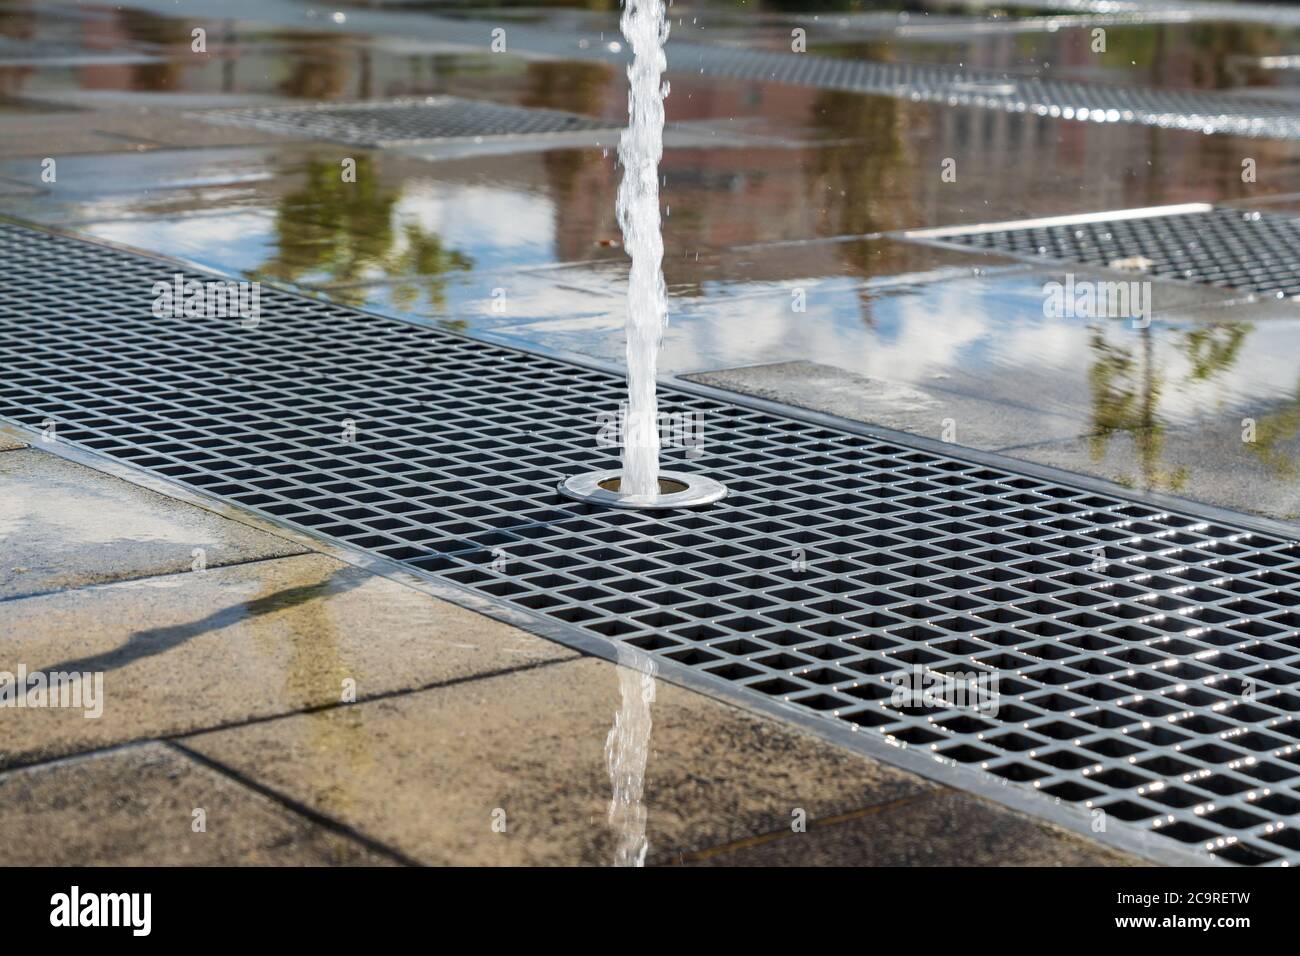 Vertical water streams of dry fountain, close up view. Streams flowing out of stainless grate. Stock Photo